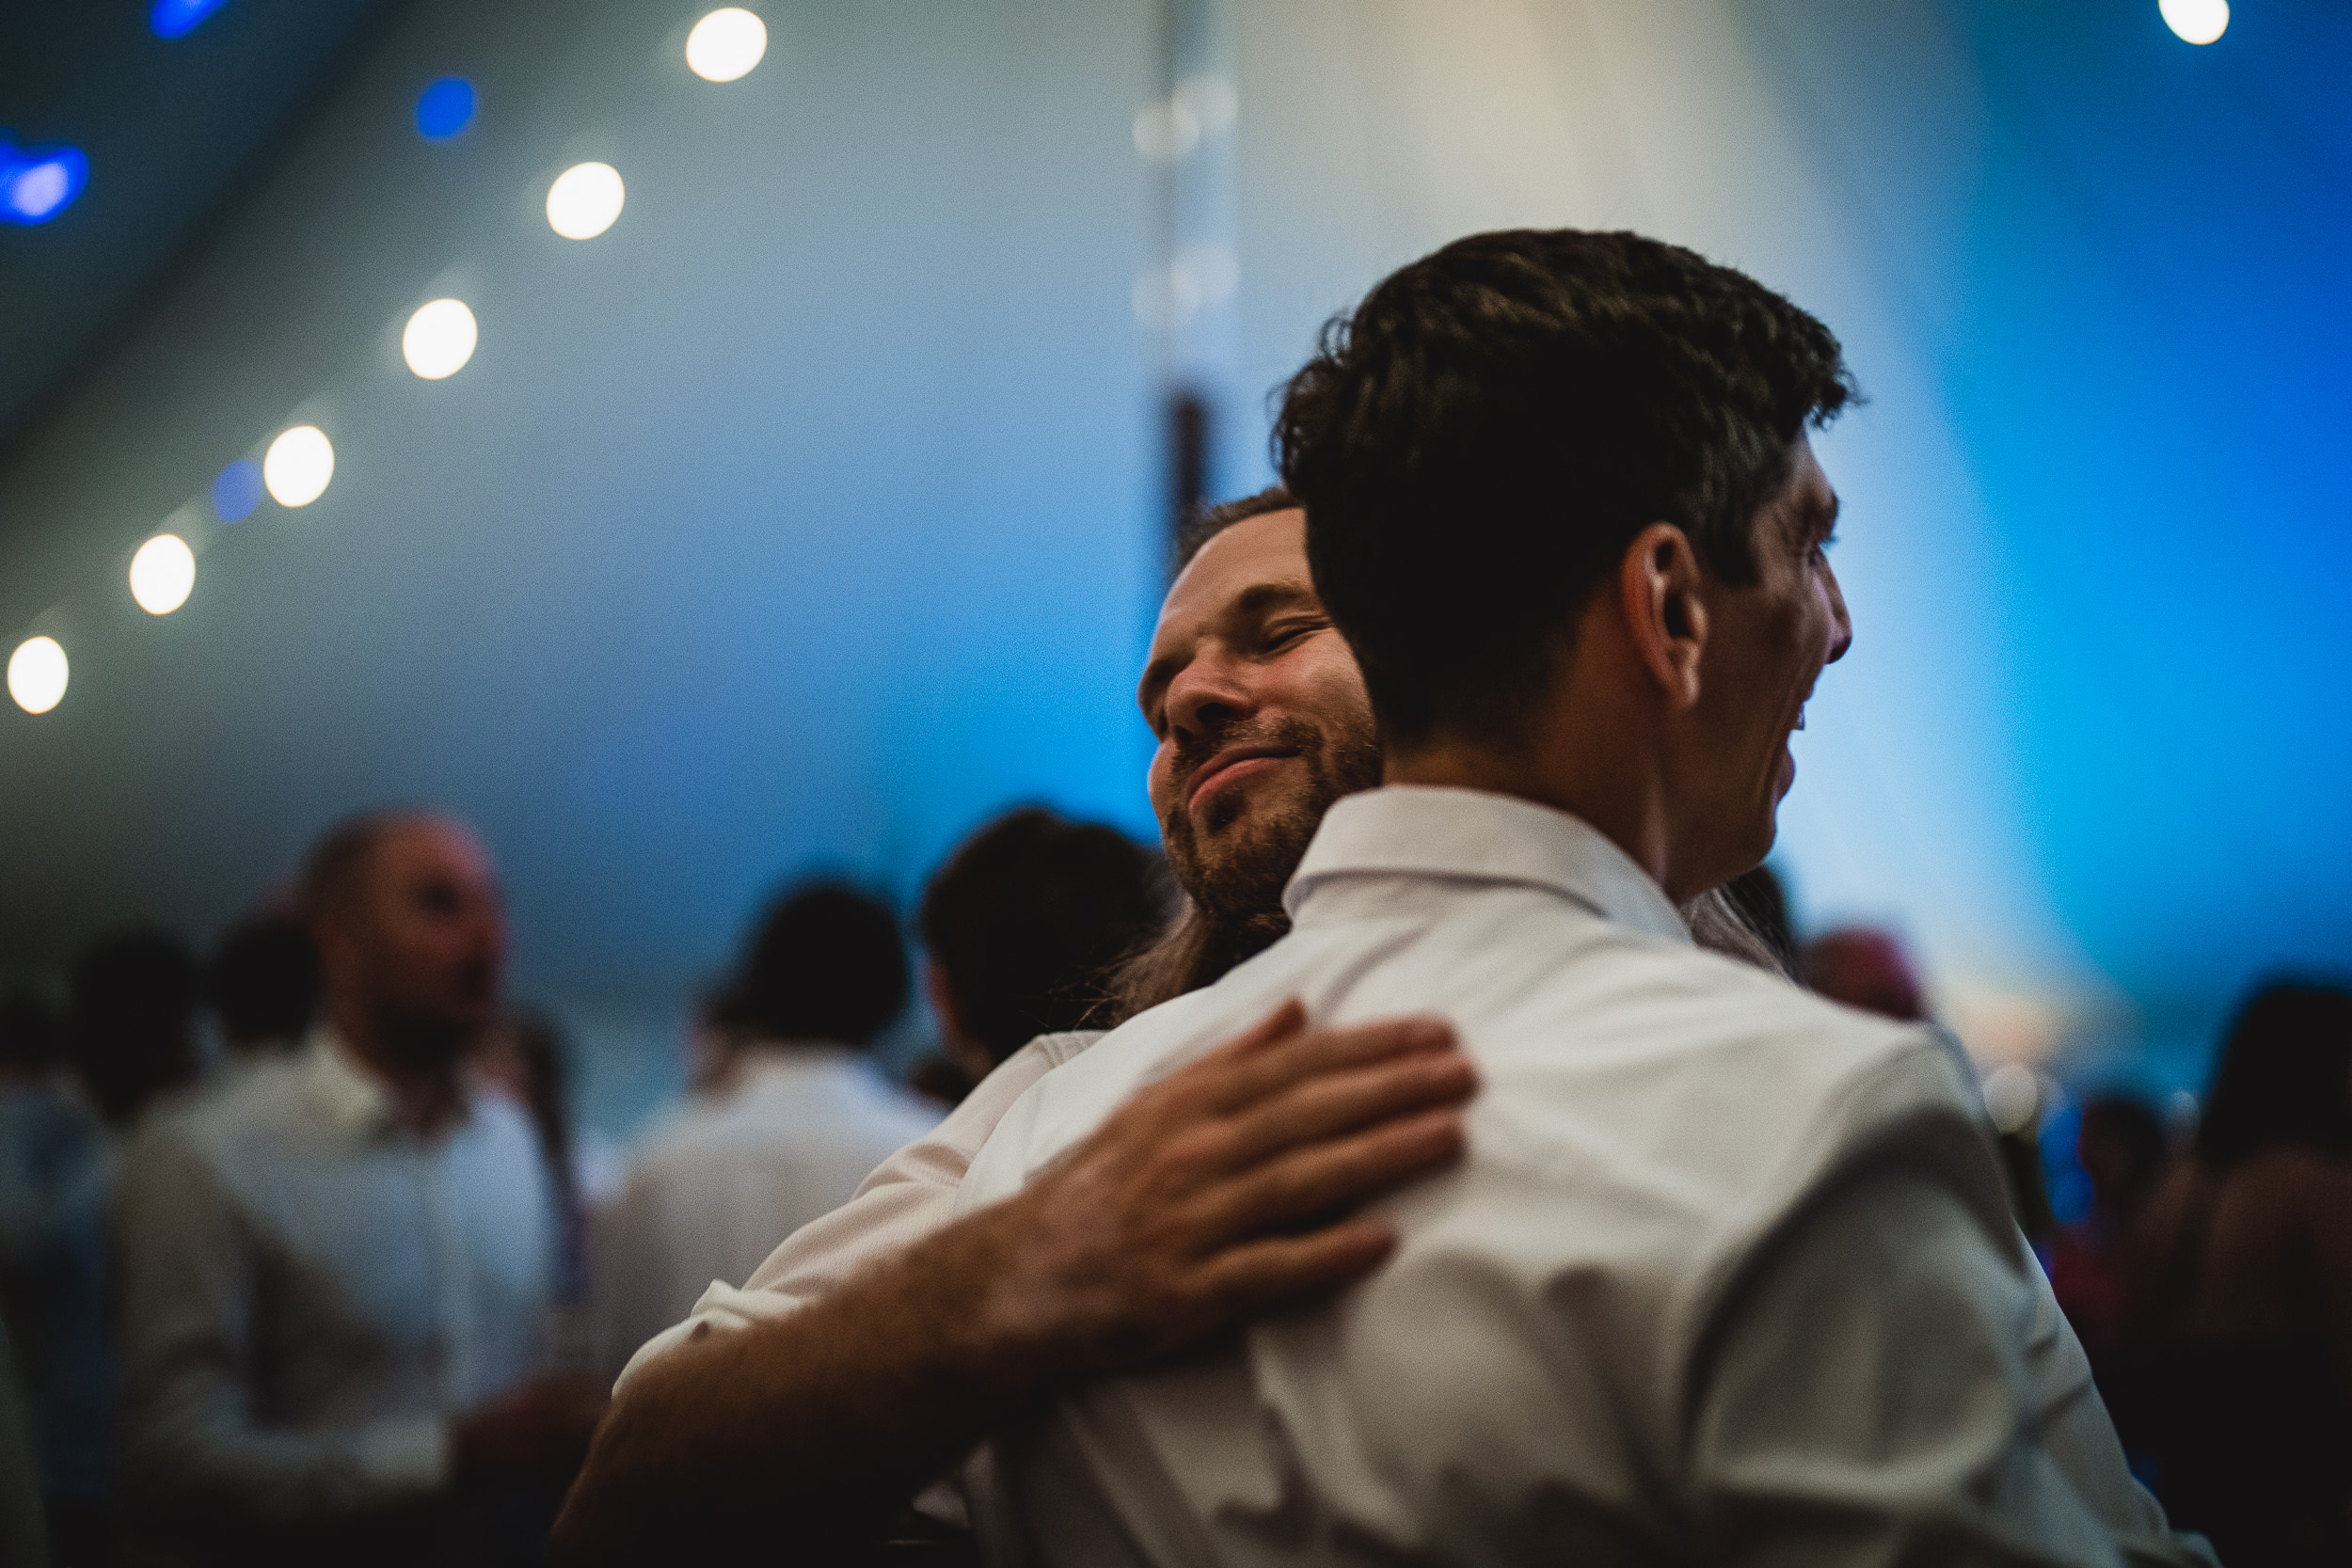 Two grooms hugging each other in their wedding photo.